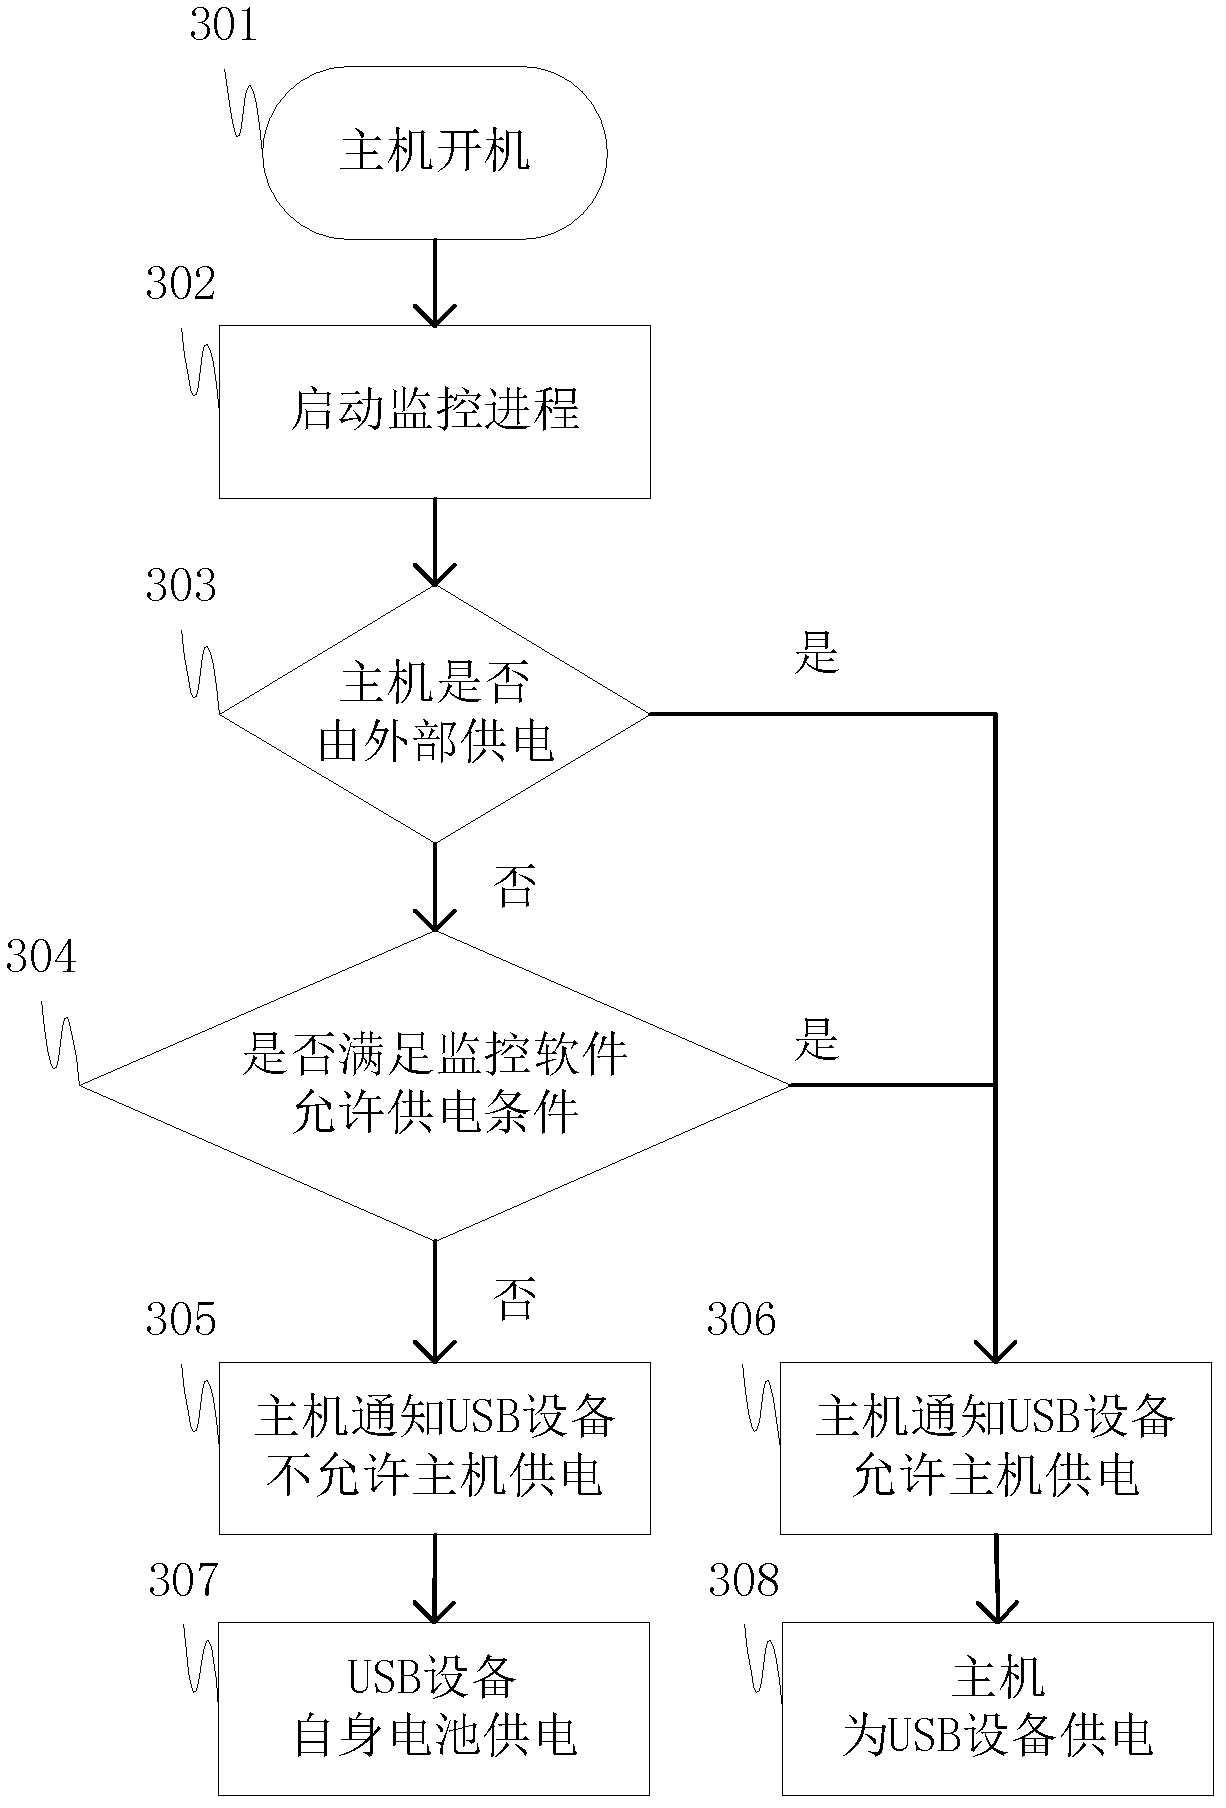 A method and system for supplying power to USB devices